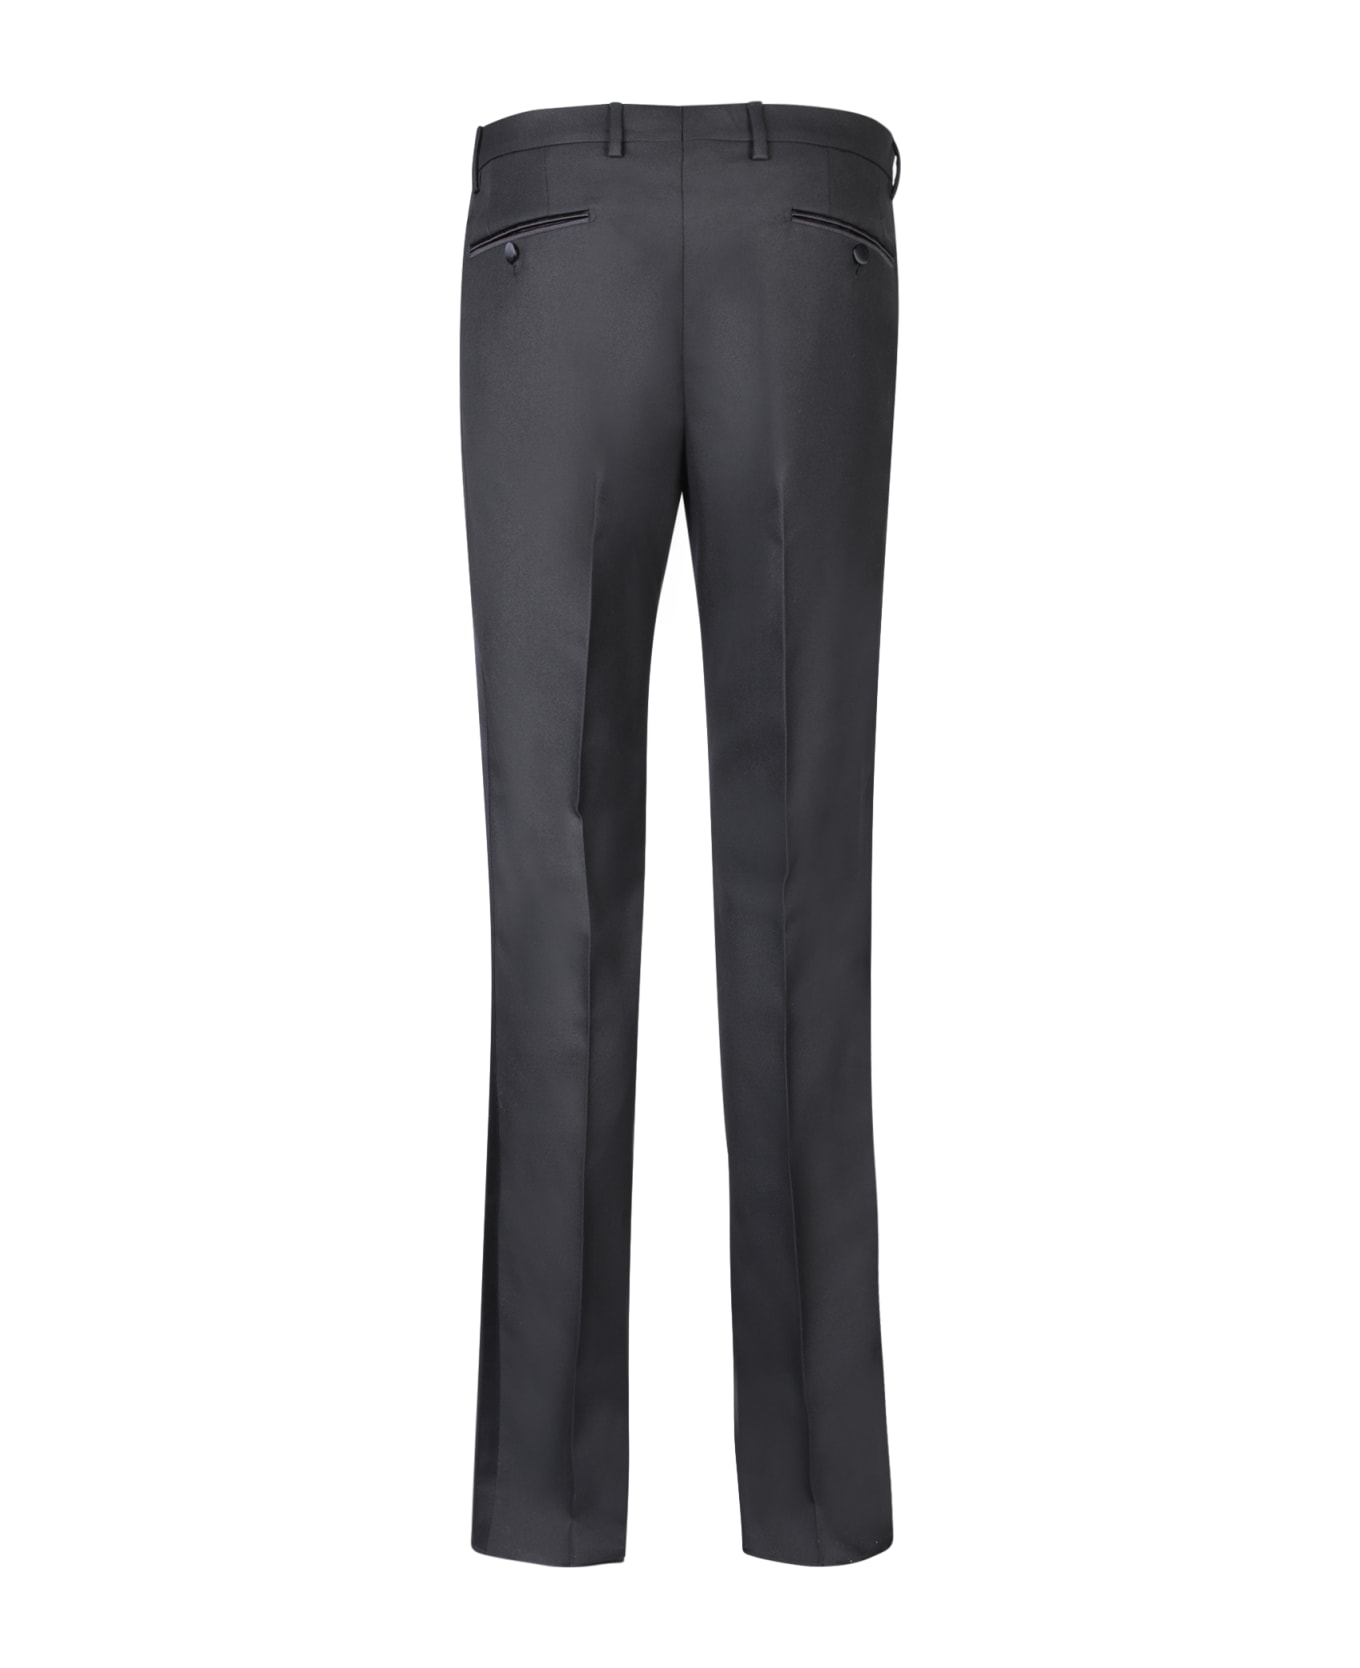 Dolce & Gabbana Mid-rise Tailored Pants - Black ボトムス